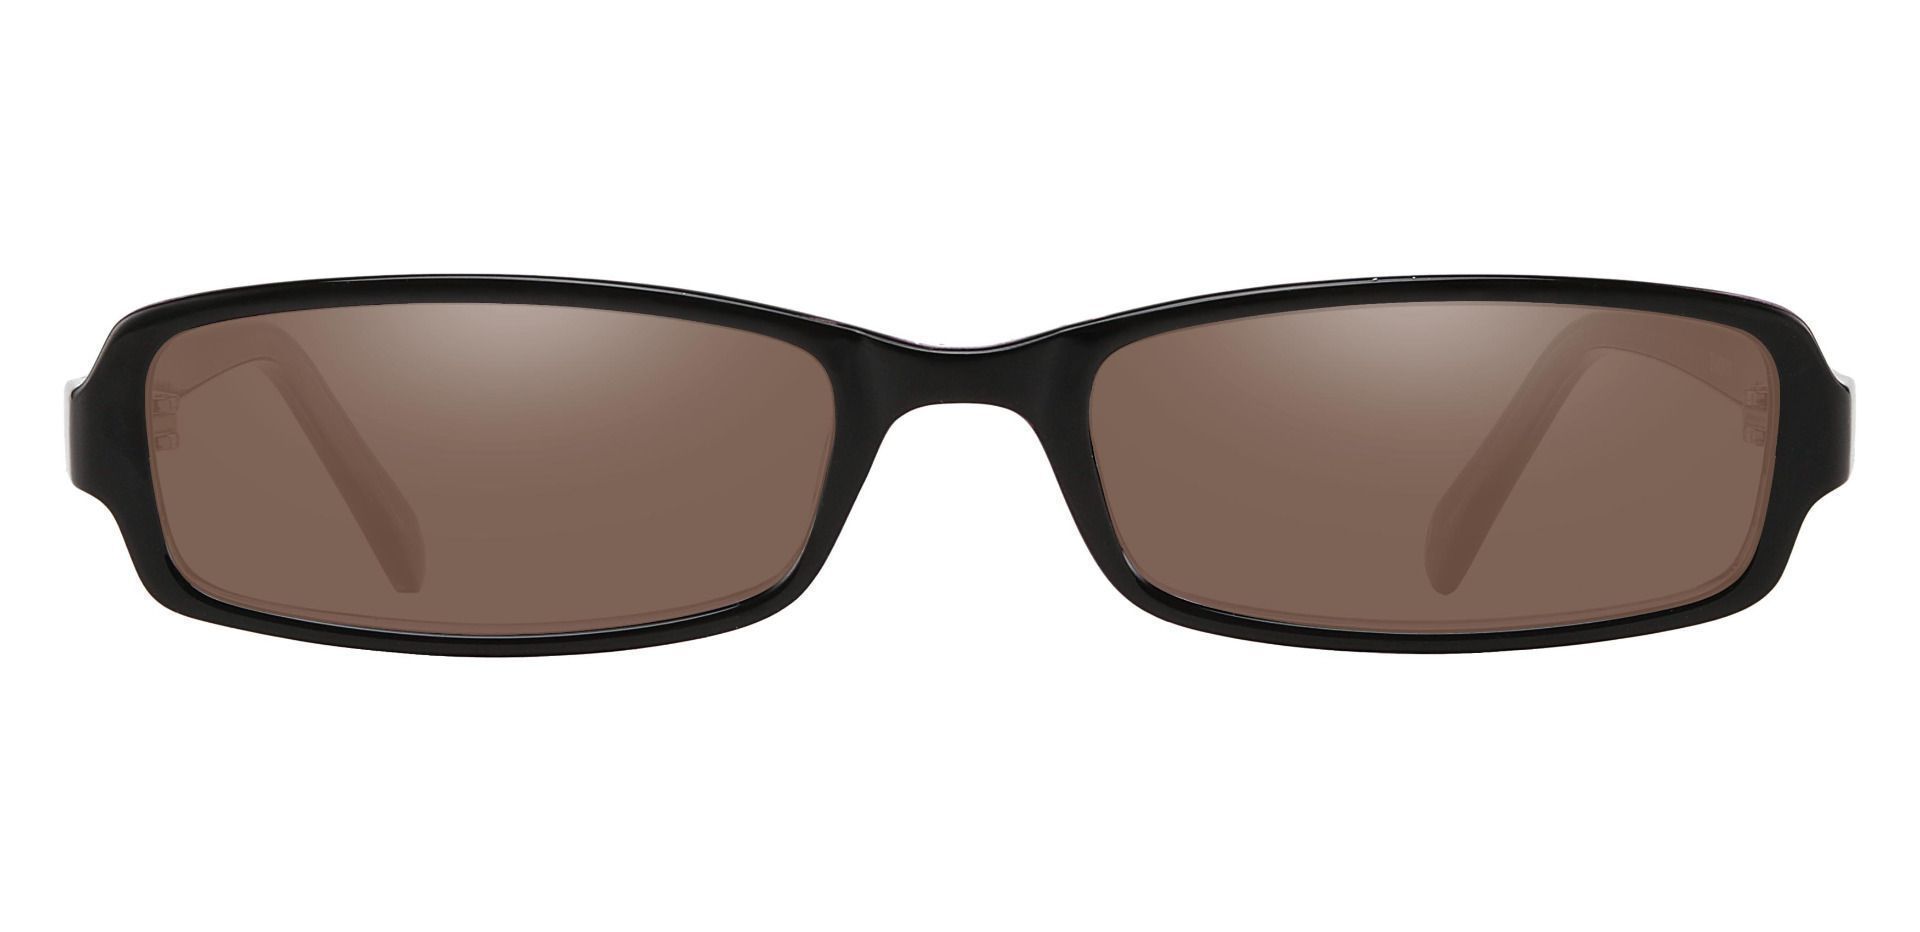 Thyme Rectangle Non-Rx Sunglasses - Black Frame With Brown Lenses